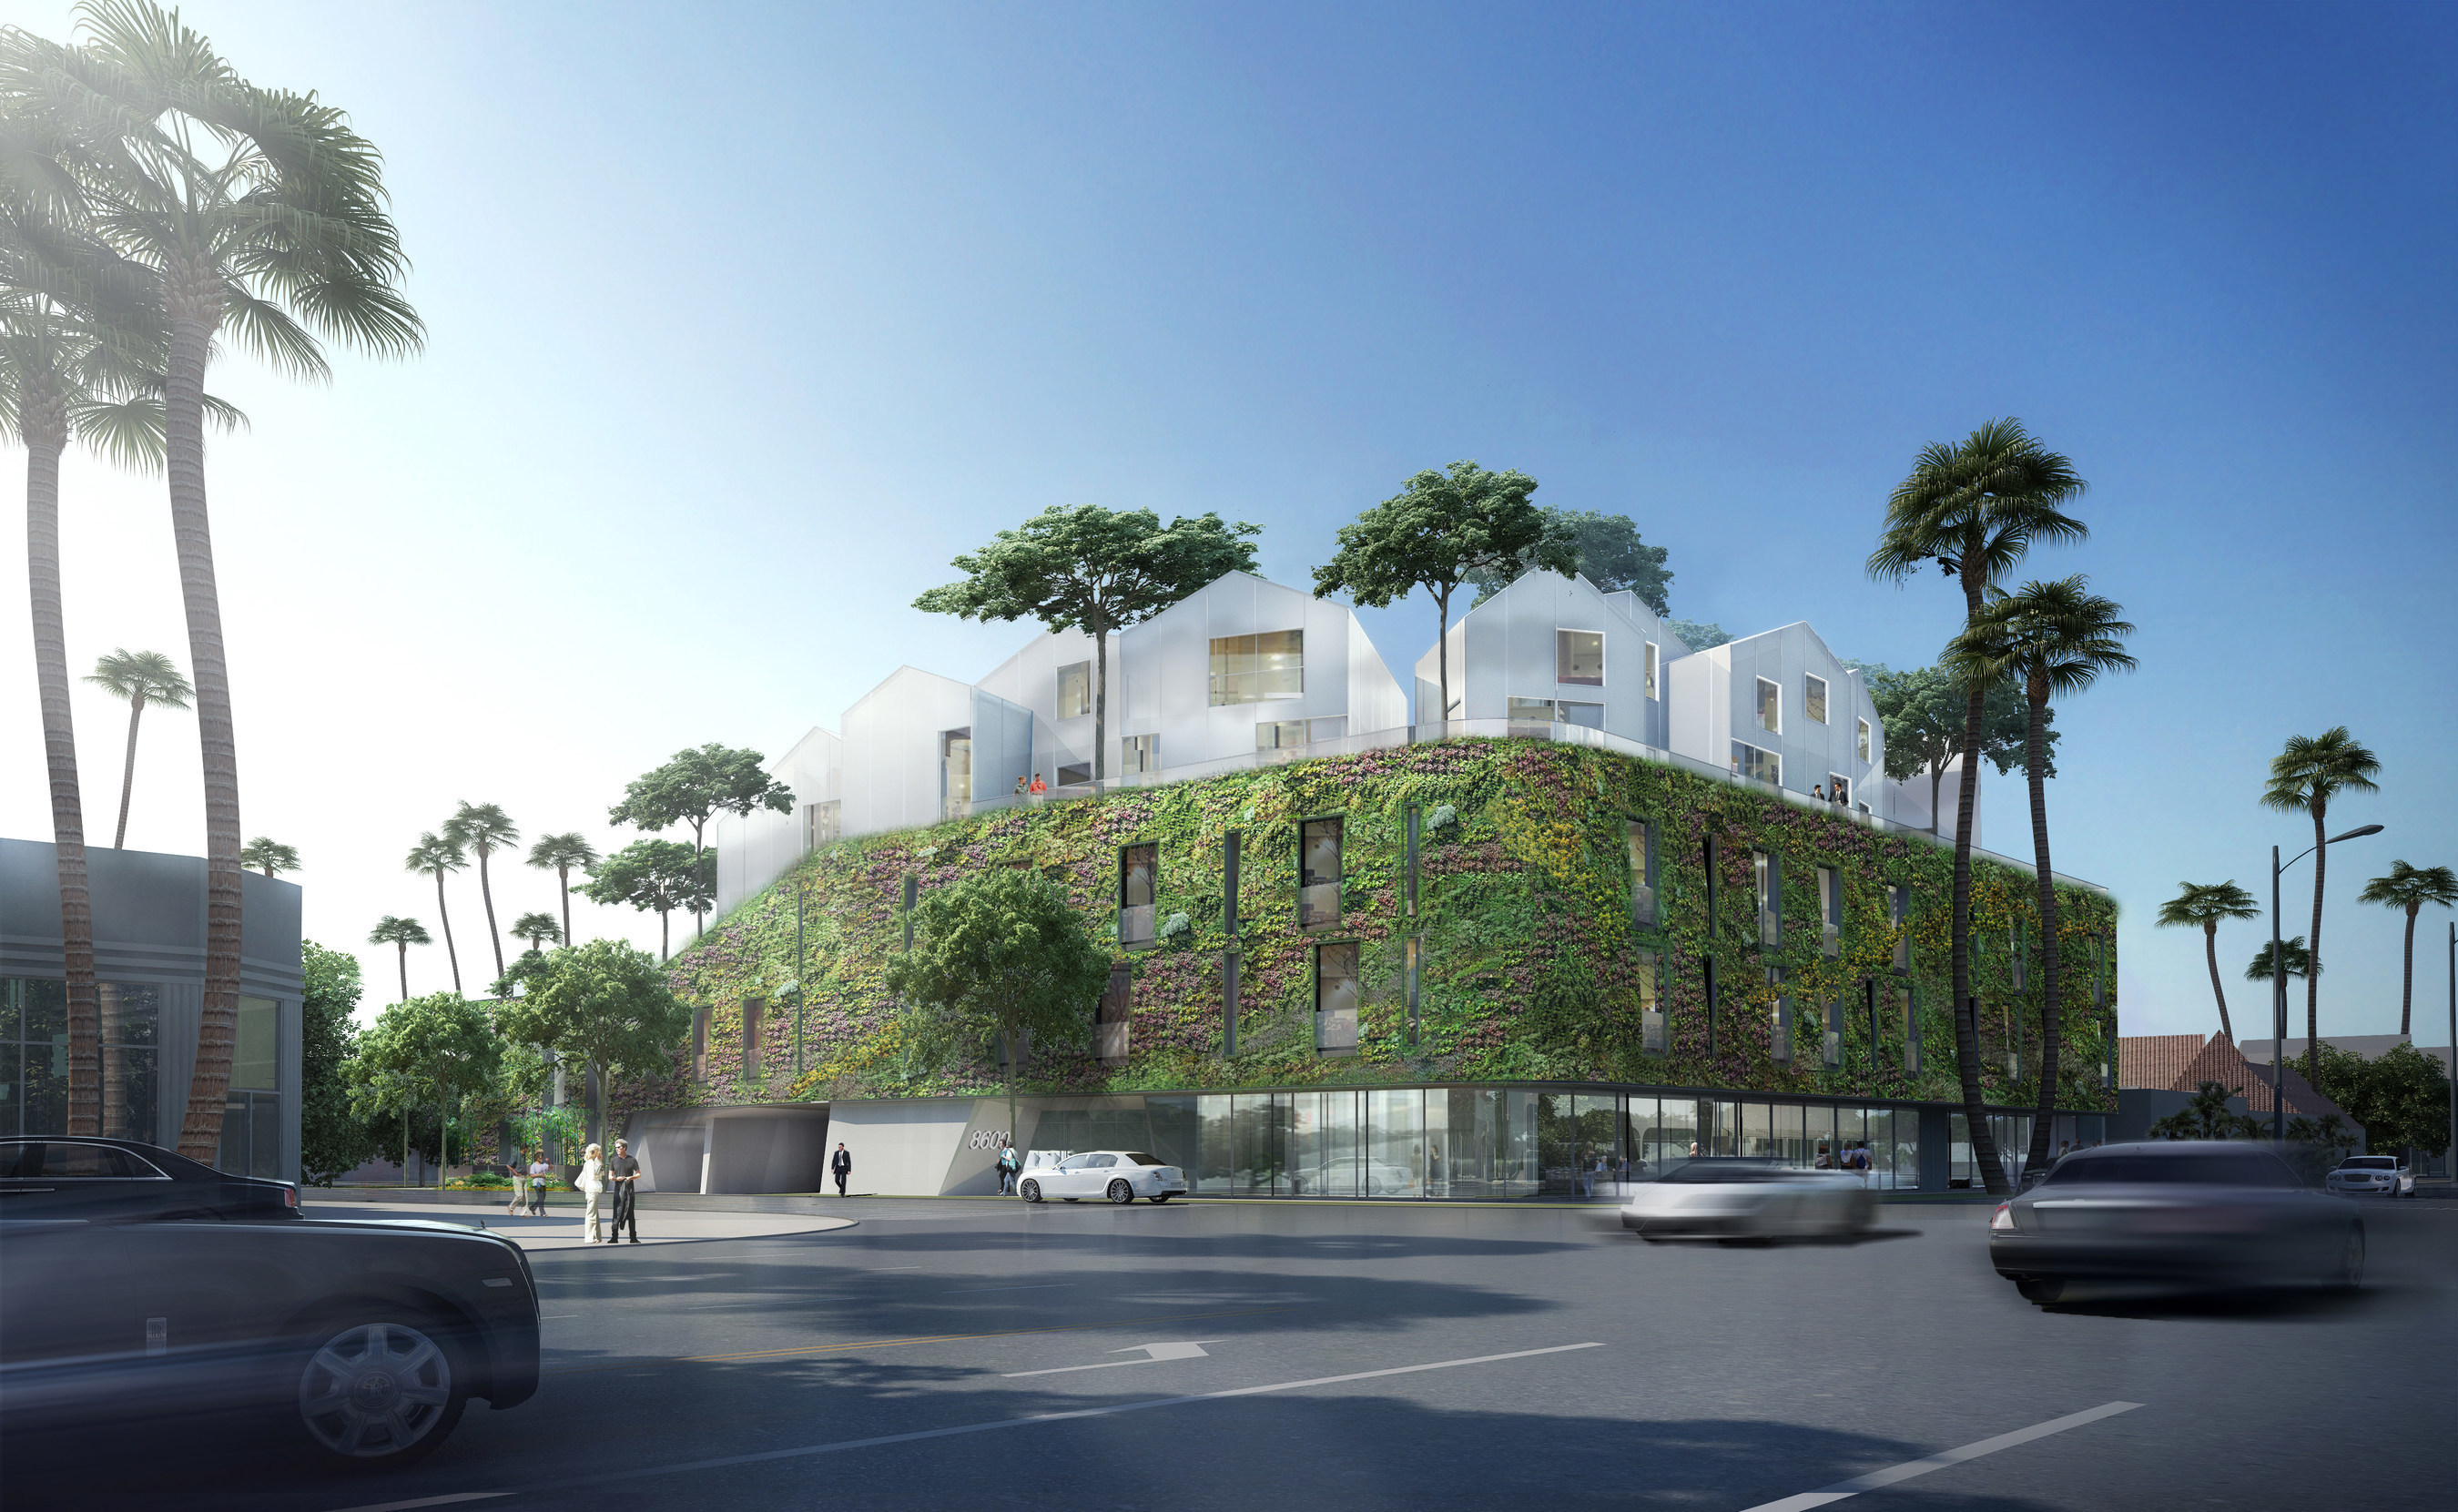 8600 Wilshire in Beverly Hills, rendering courtesy of MAD